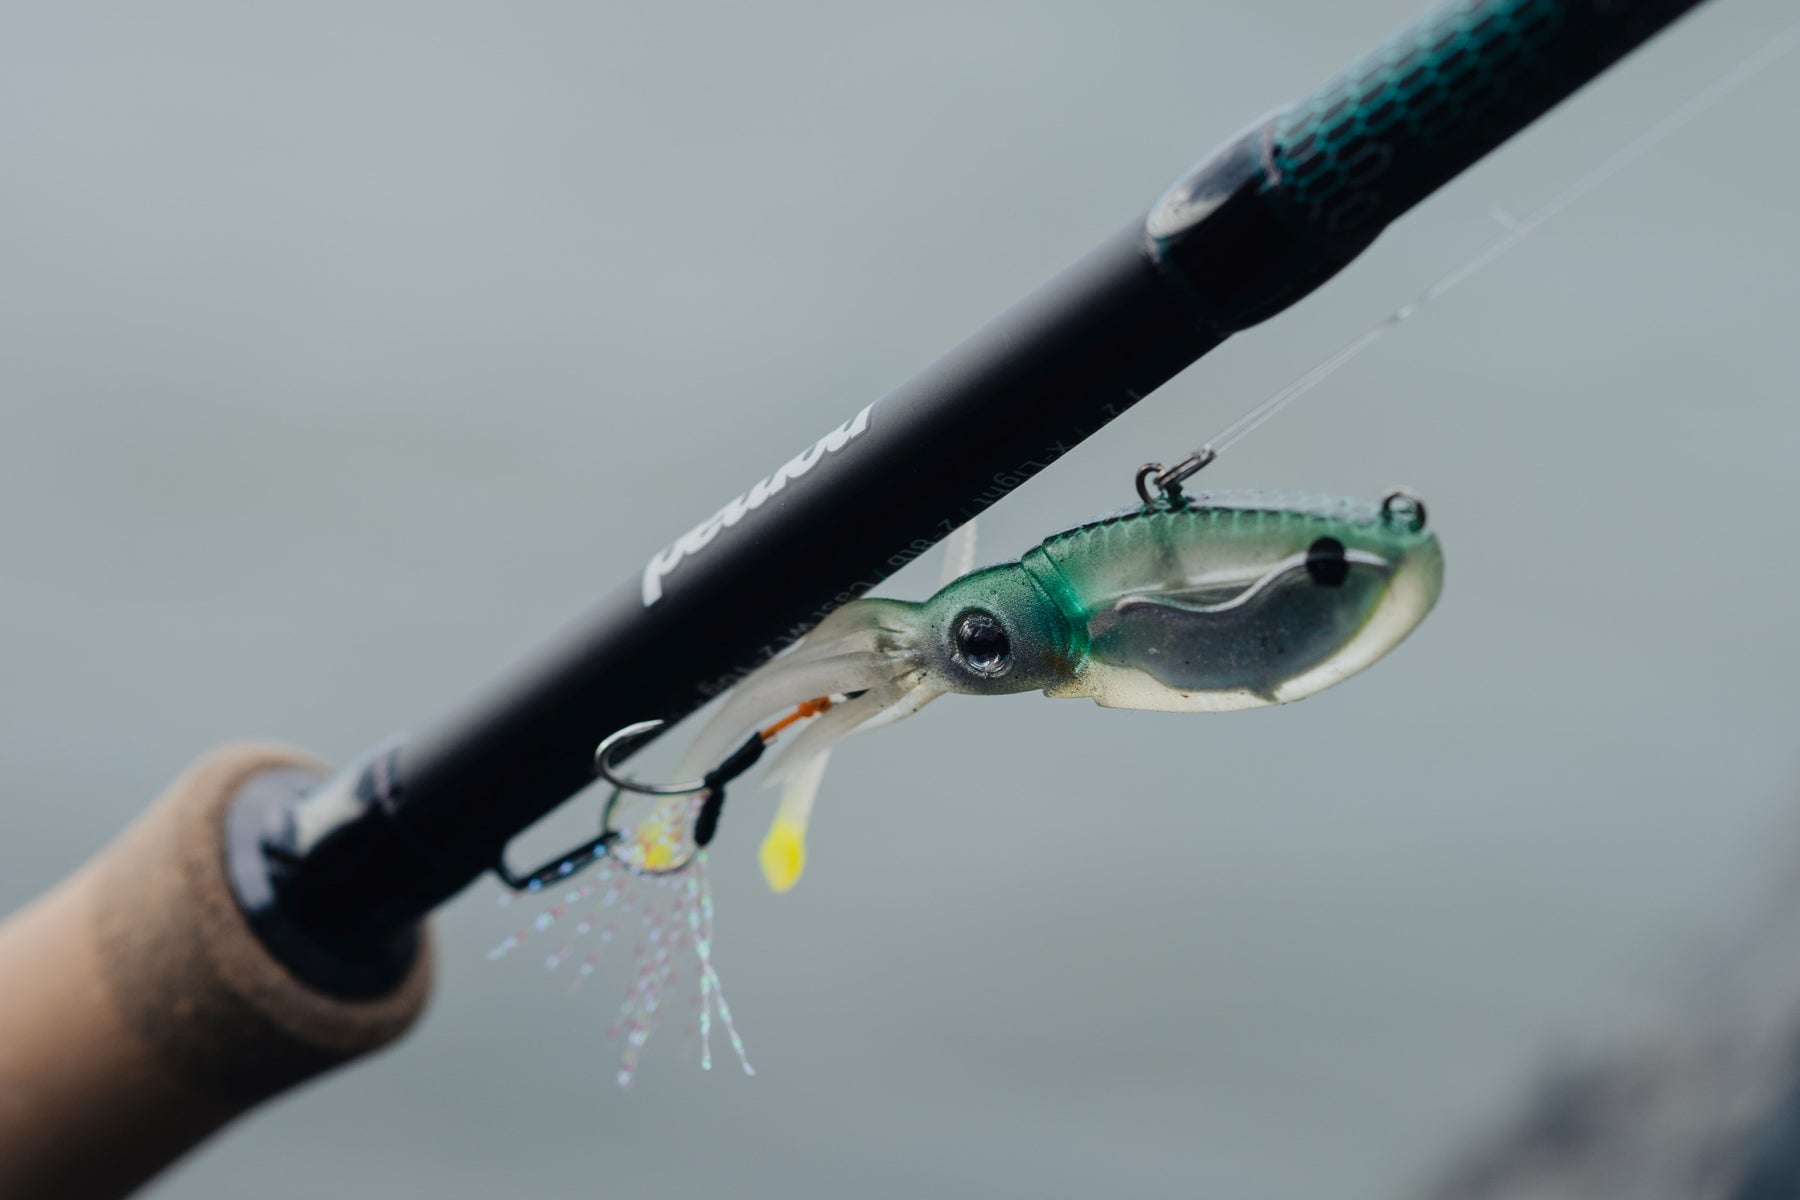 Nomad Squidtrex 55 - Green Gold Gizzy – Trophy Trout Lures and Fly Fishing